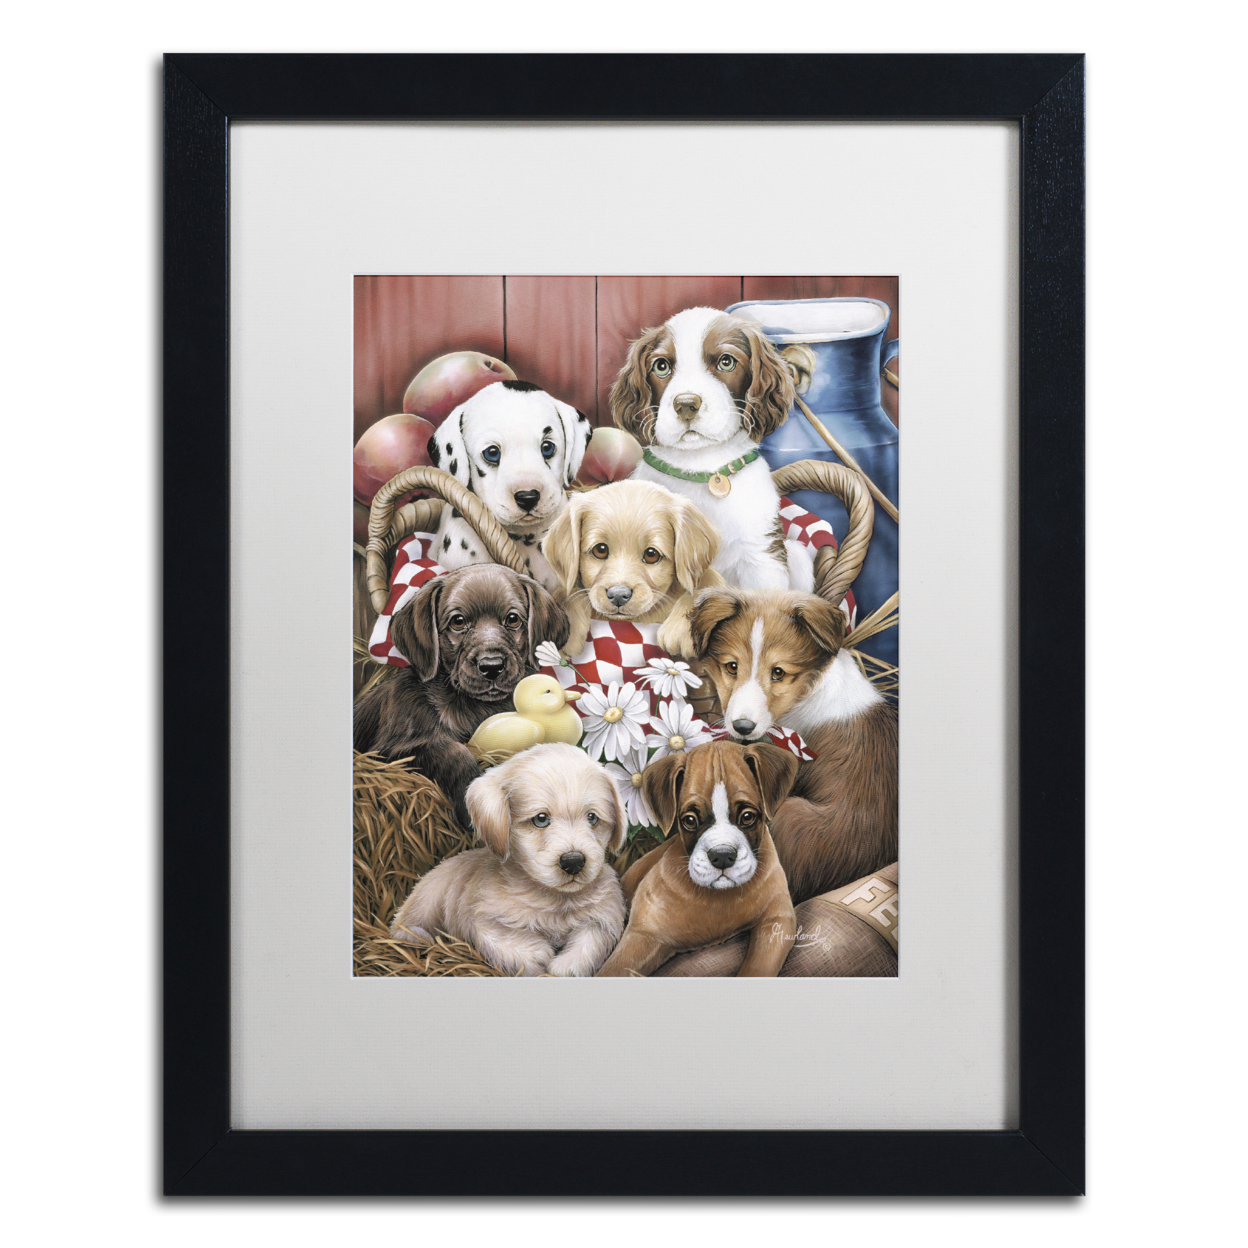 Jenny Newland 'Puppy Pals' Black Wooden Framed Art 18 X 22 Inches